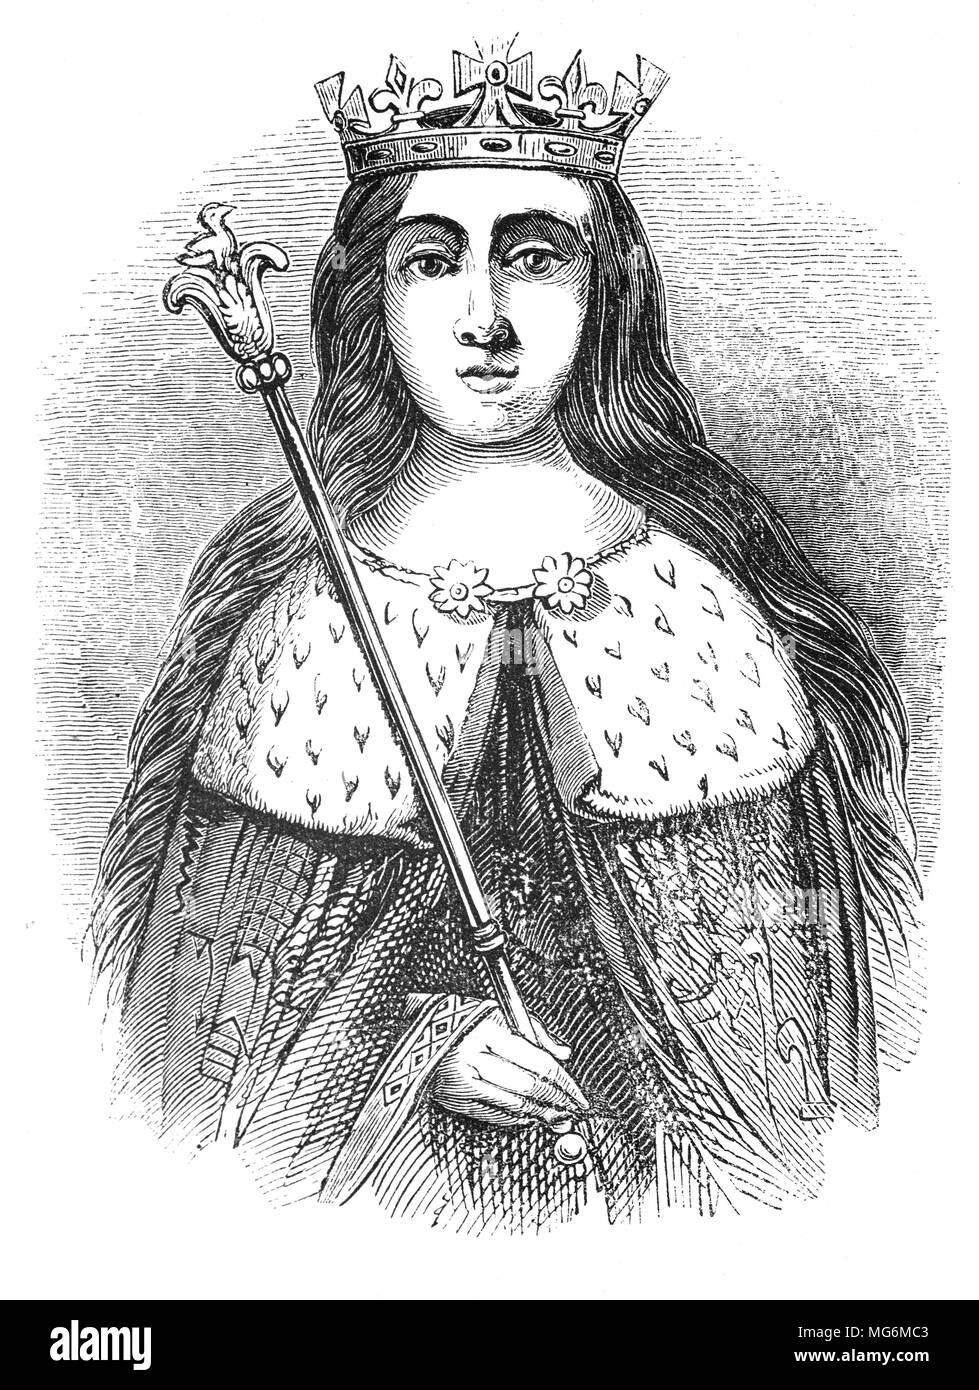 A portrait of Anne Neville (1456 –1485) who became Princess of Wales as the wife of Edward of Westminster.  As a member of the powerful House of Neville, she played a critical part in an attempt to halt the Wars of the Roses  between the House of York and House of Lancaster for the English crown.  After the death of Edward, she married Richard, Duke of Gloucester, brother of Edward IV and became queen when Richard III ascended the throne in June 1483, following the declaration that Edward IV's children by Elizabeth Woodville were illegitimate. Stock Photo